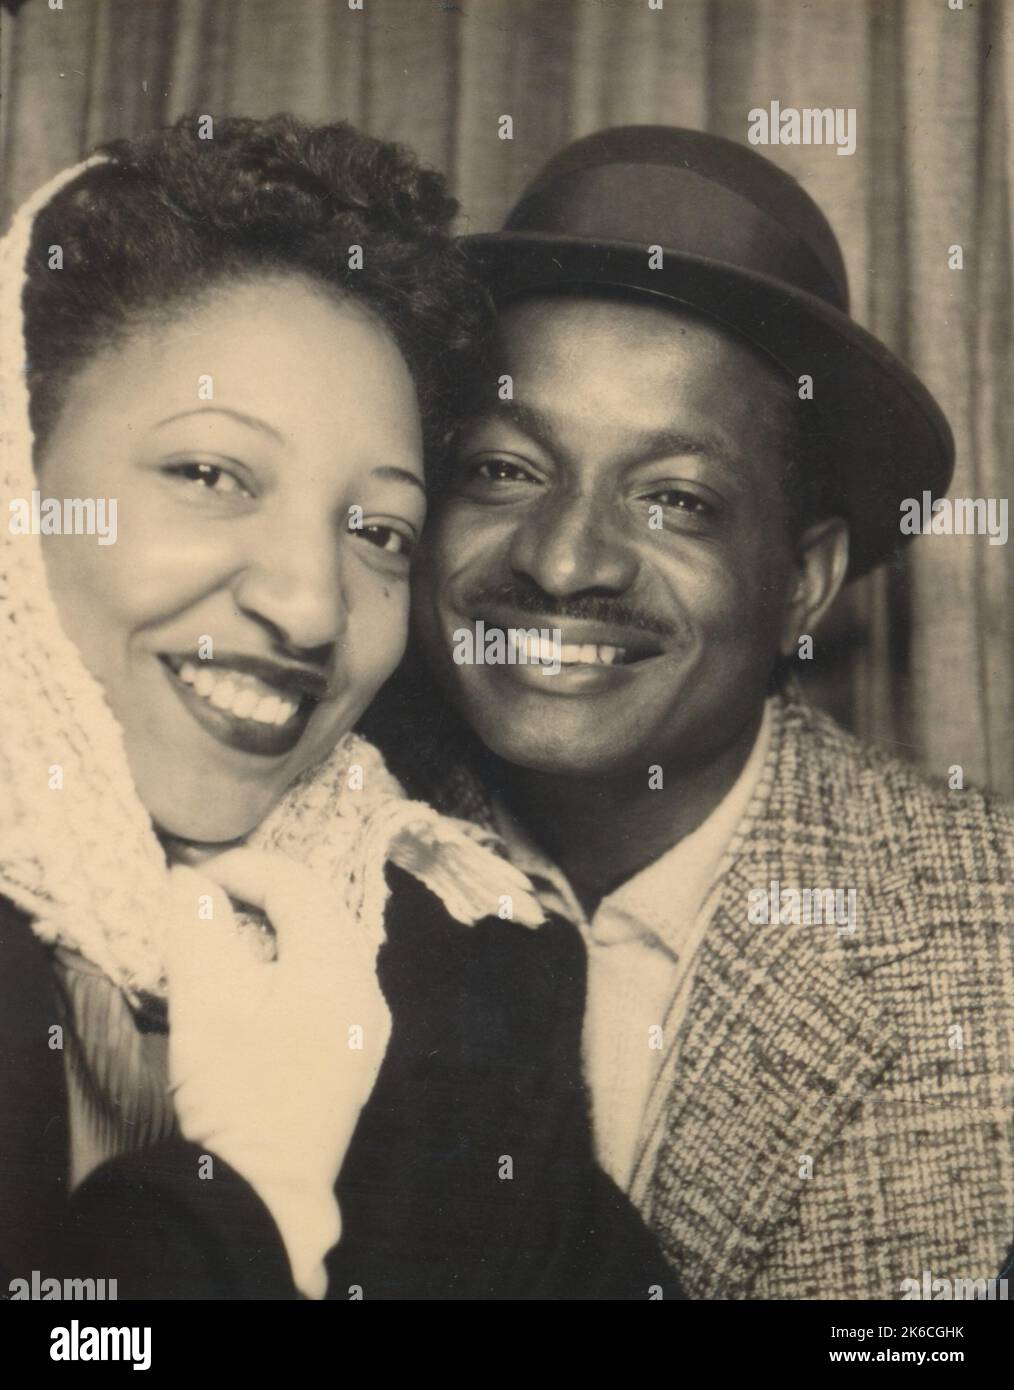 Couple Smiling in Photo Booth 1940s New Orleans Stock Photo